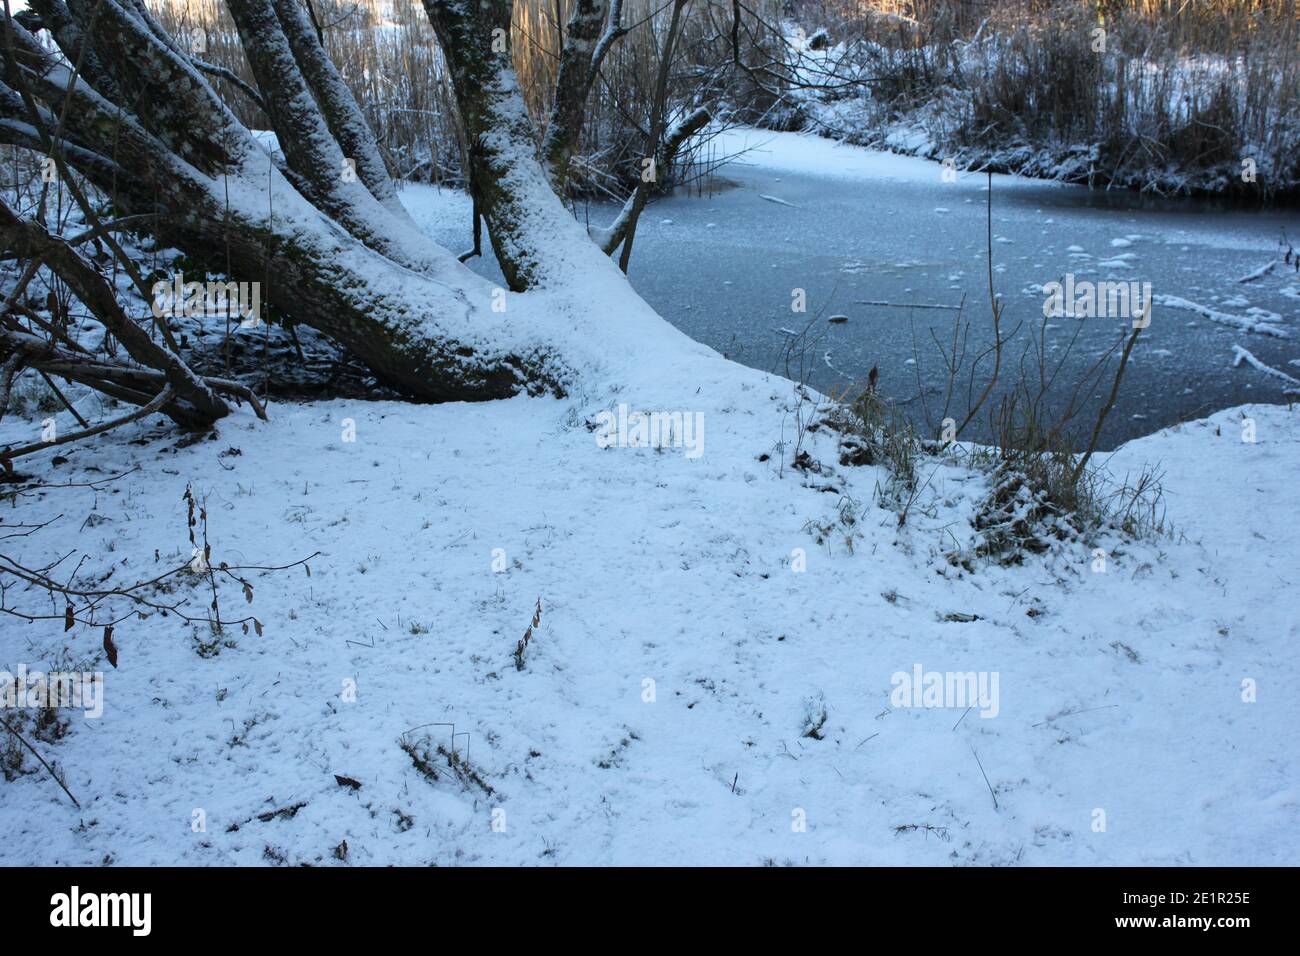 Hiking in public park during the winter. Snow covered forests and icy lakes, public parks, walking and hiking in nature. Seasons, winter time UK. Stock Photo